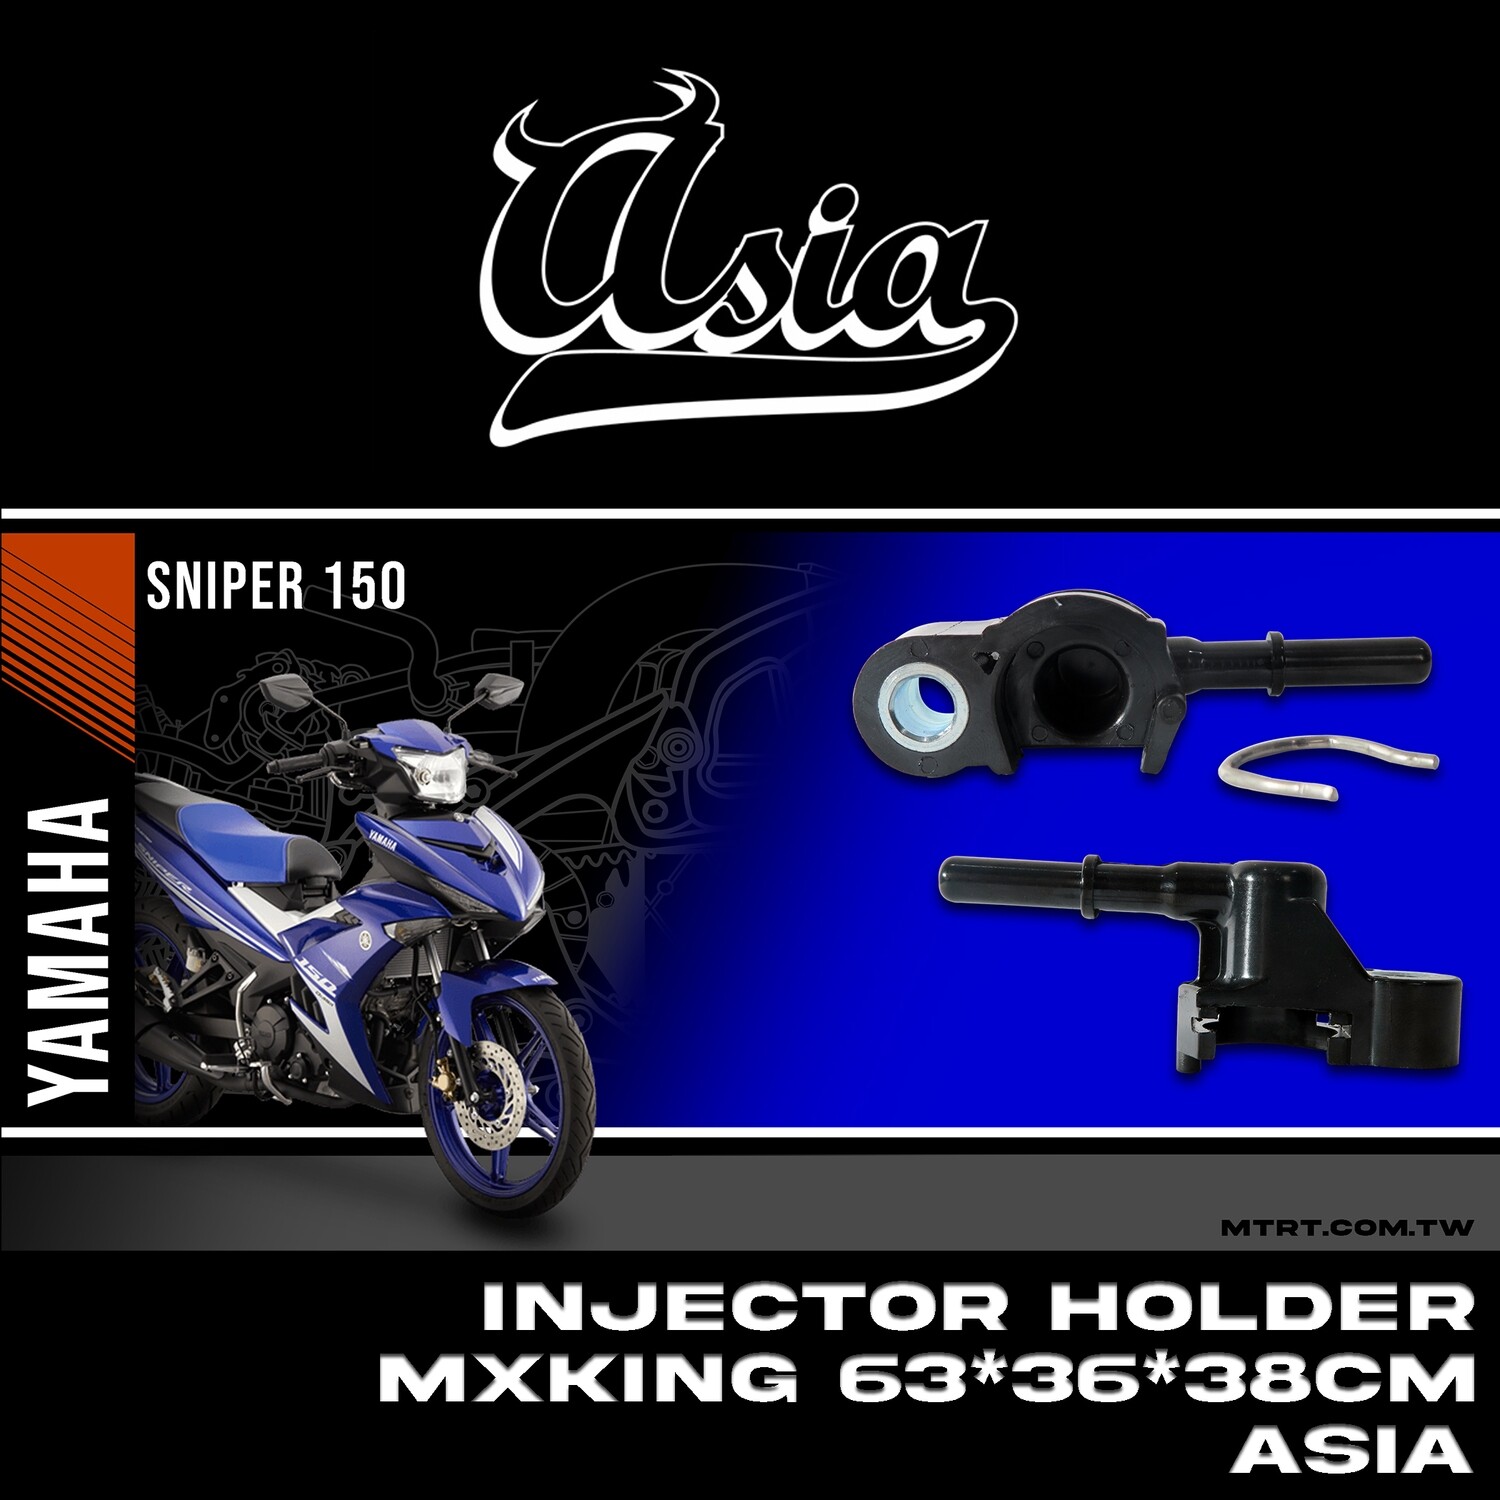 INJECTOR HOLDER MXKING/NMAX 63*36*38cm ASIA